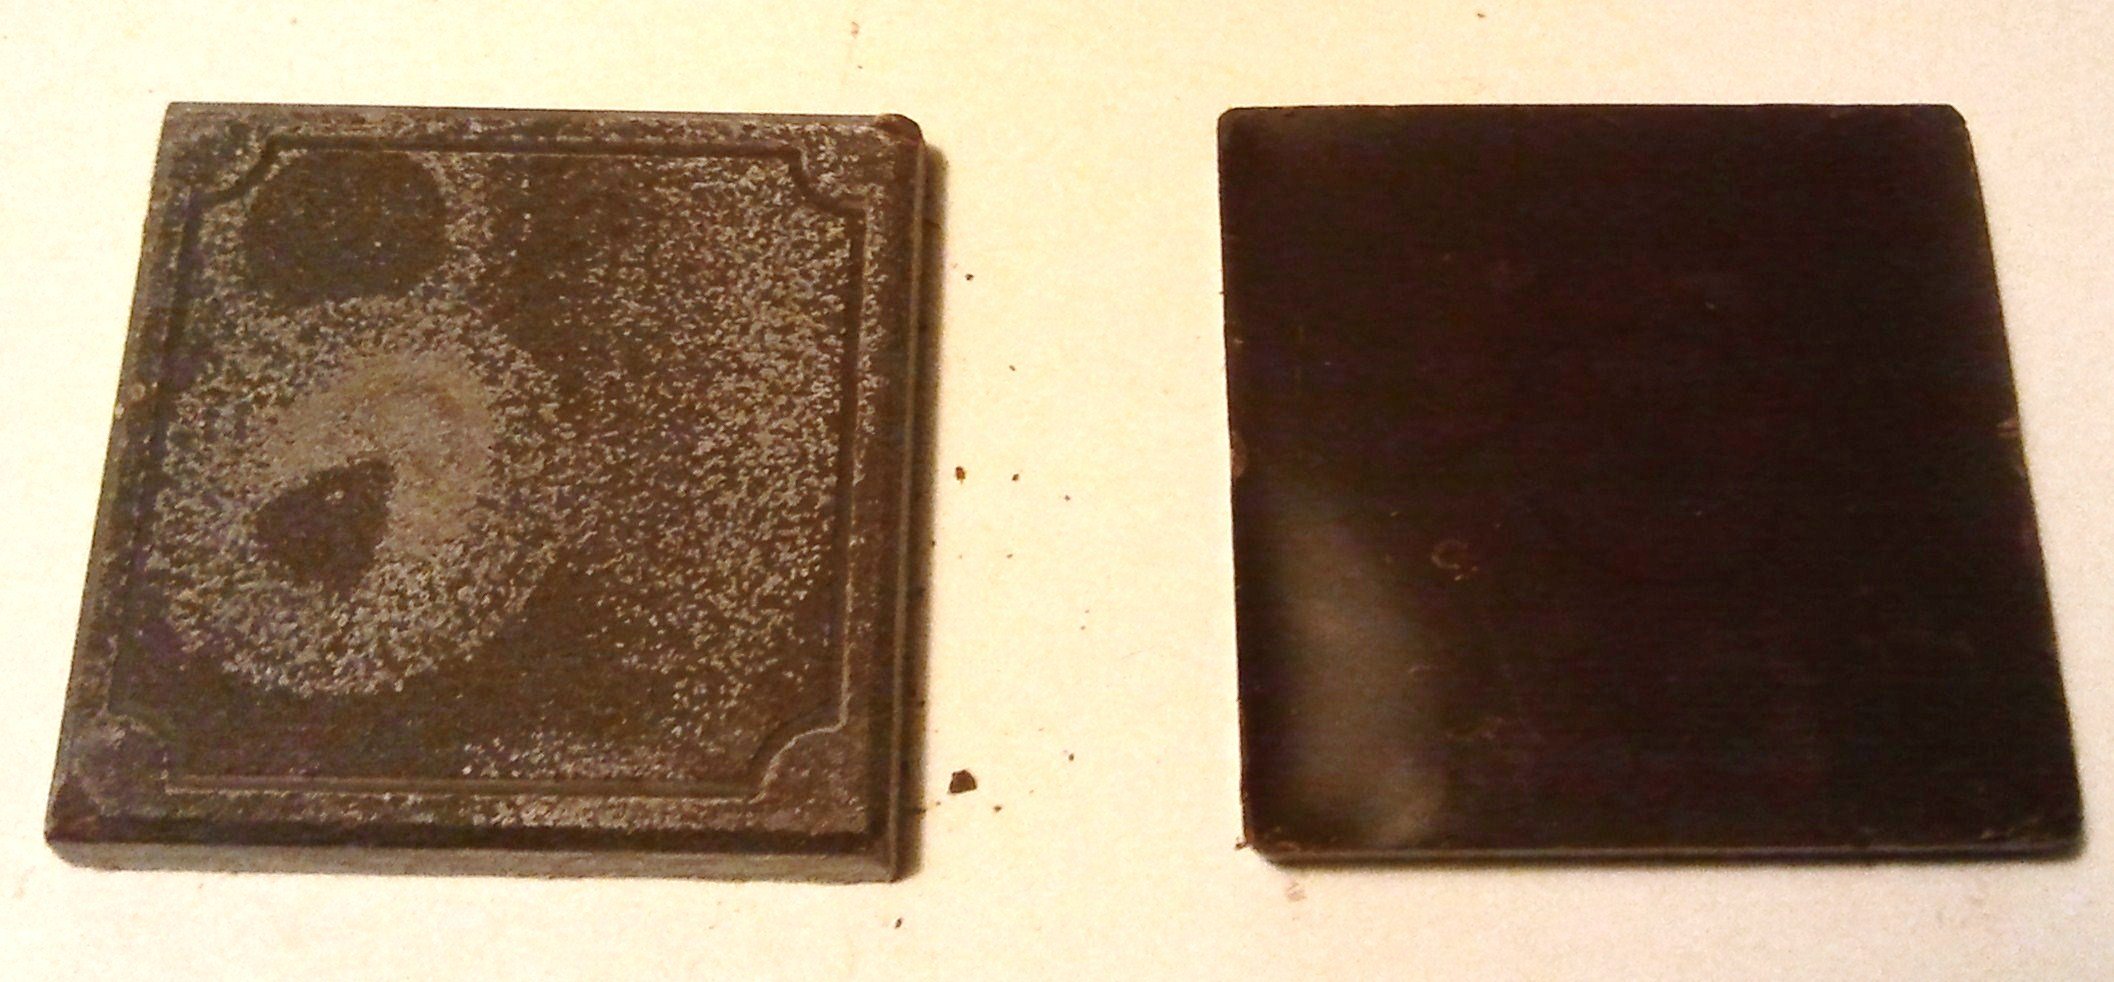 On the right, a form V polymorph. On the left, the form VI polymorph. All chocolate eventually spontaneously converts to the form on the left.